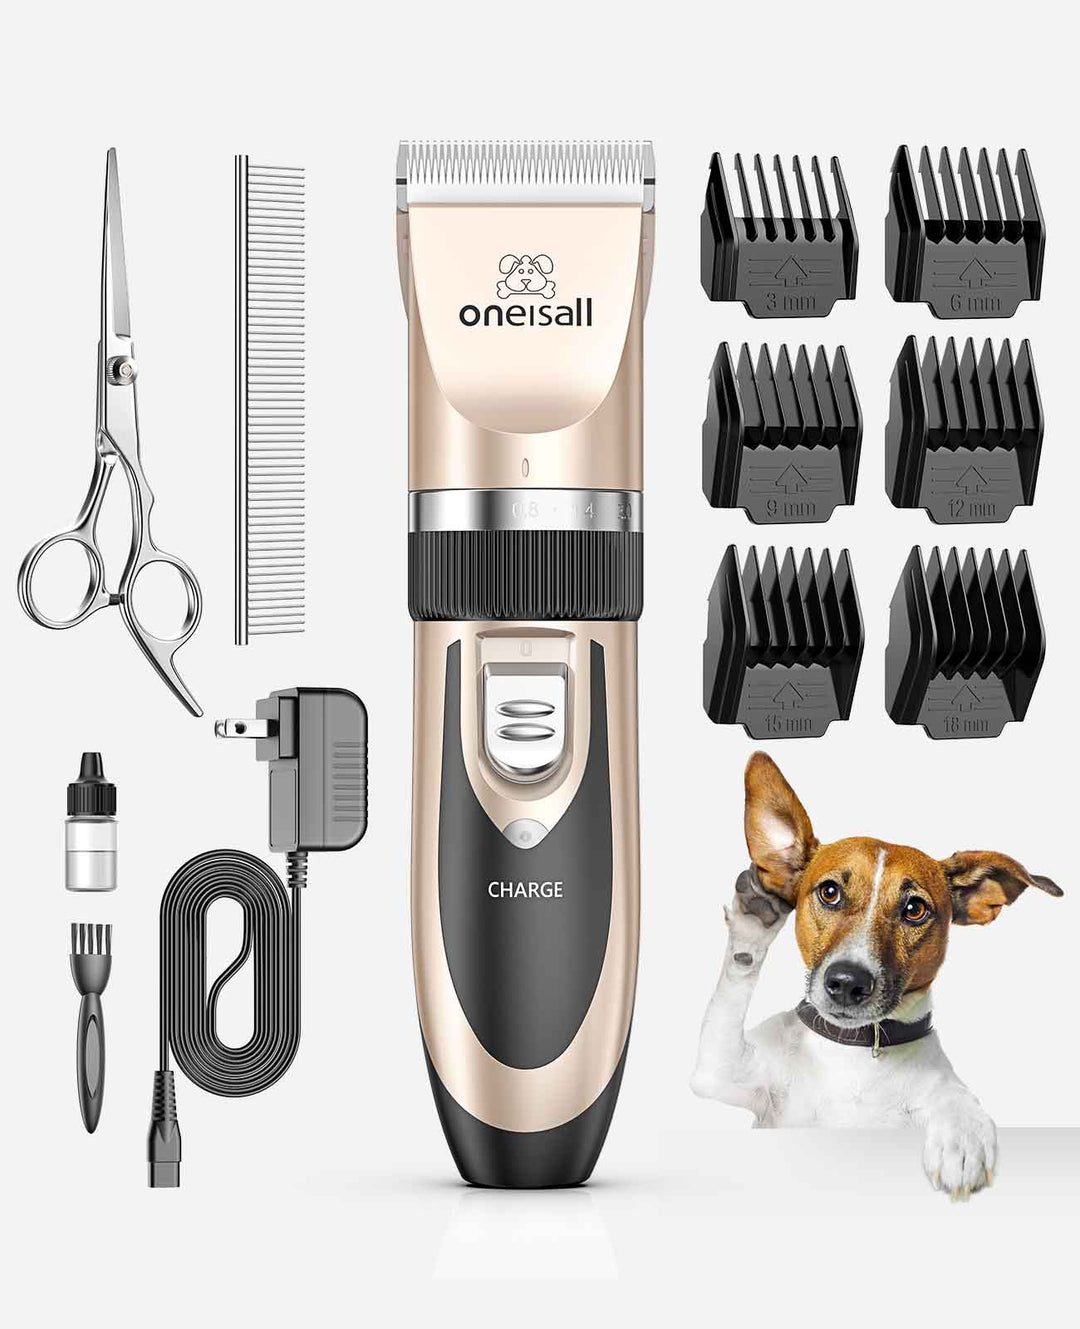 oneisall p2 dog grooming clipper